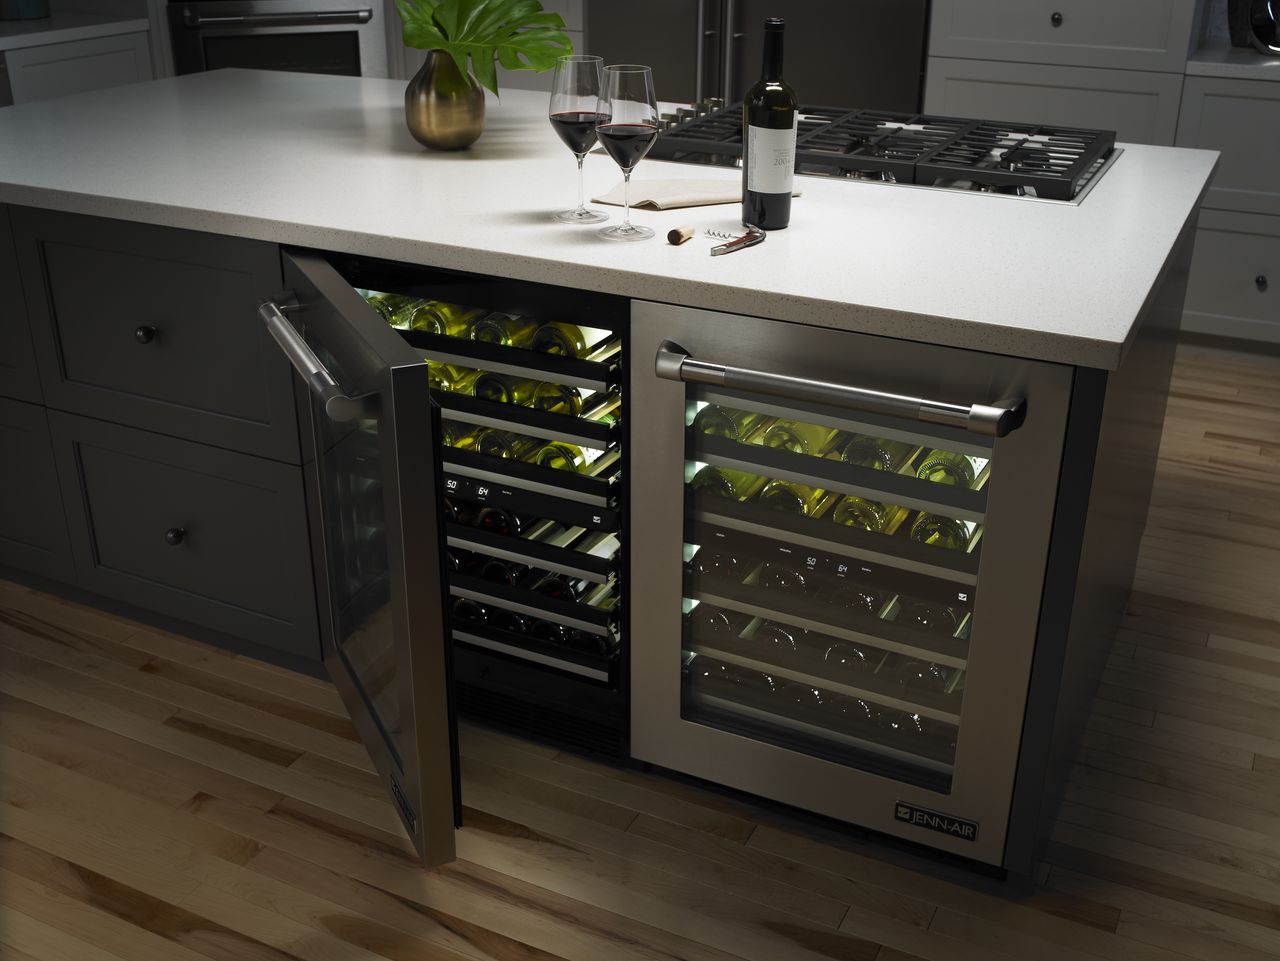 Wine Cooler Making You Whine?